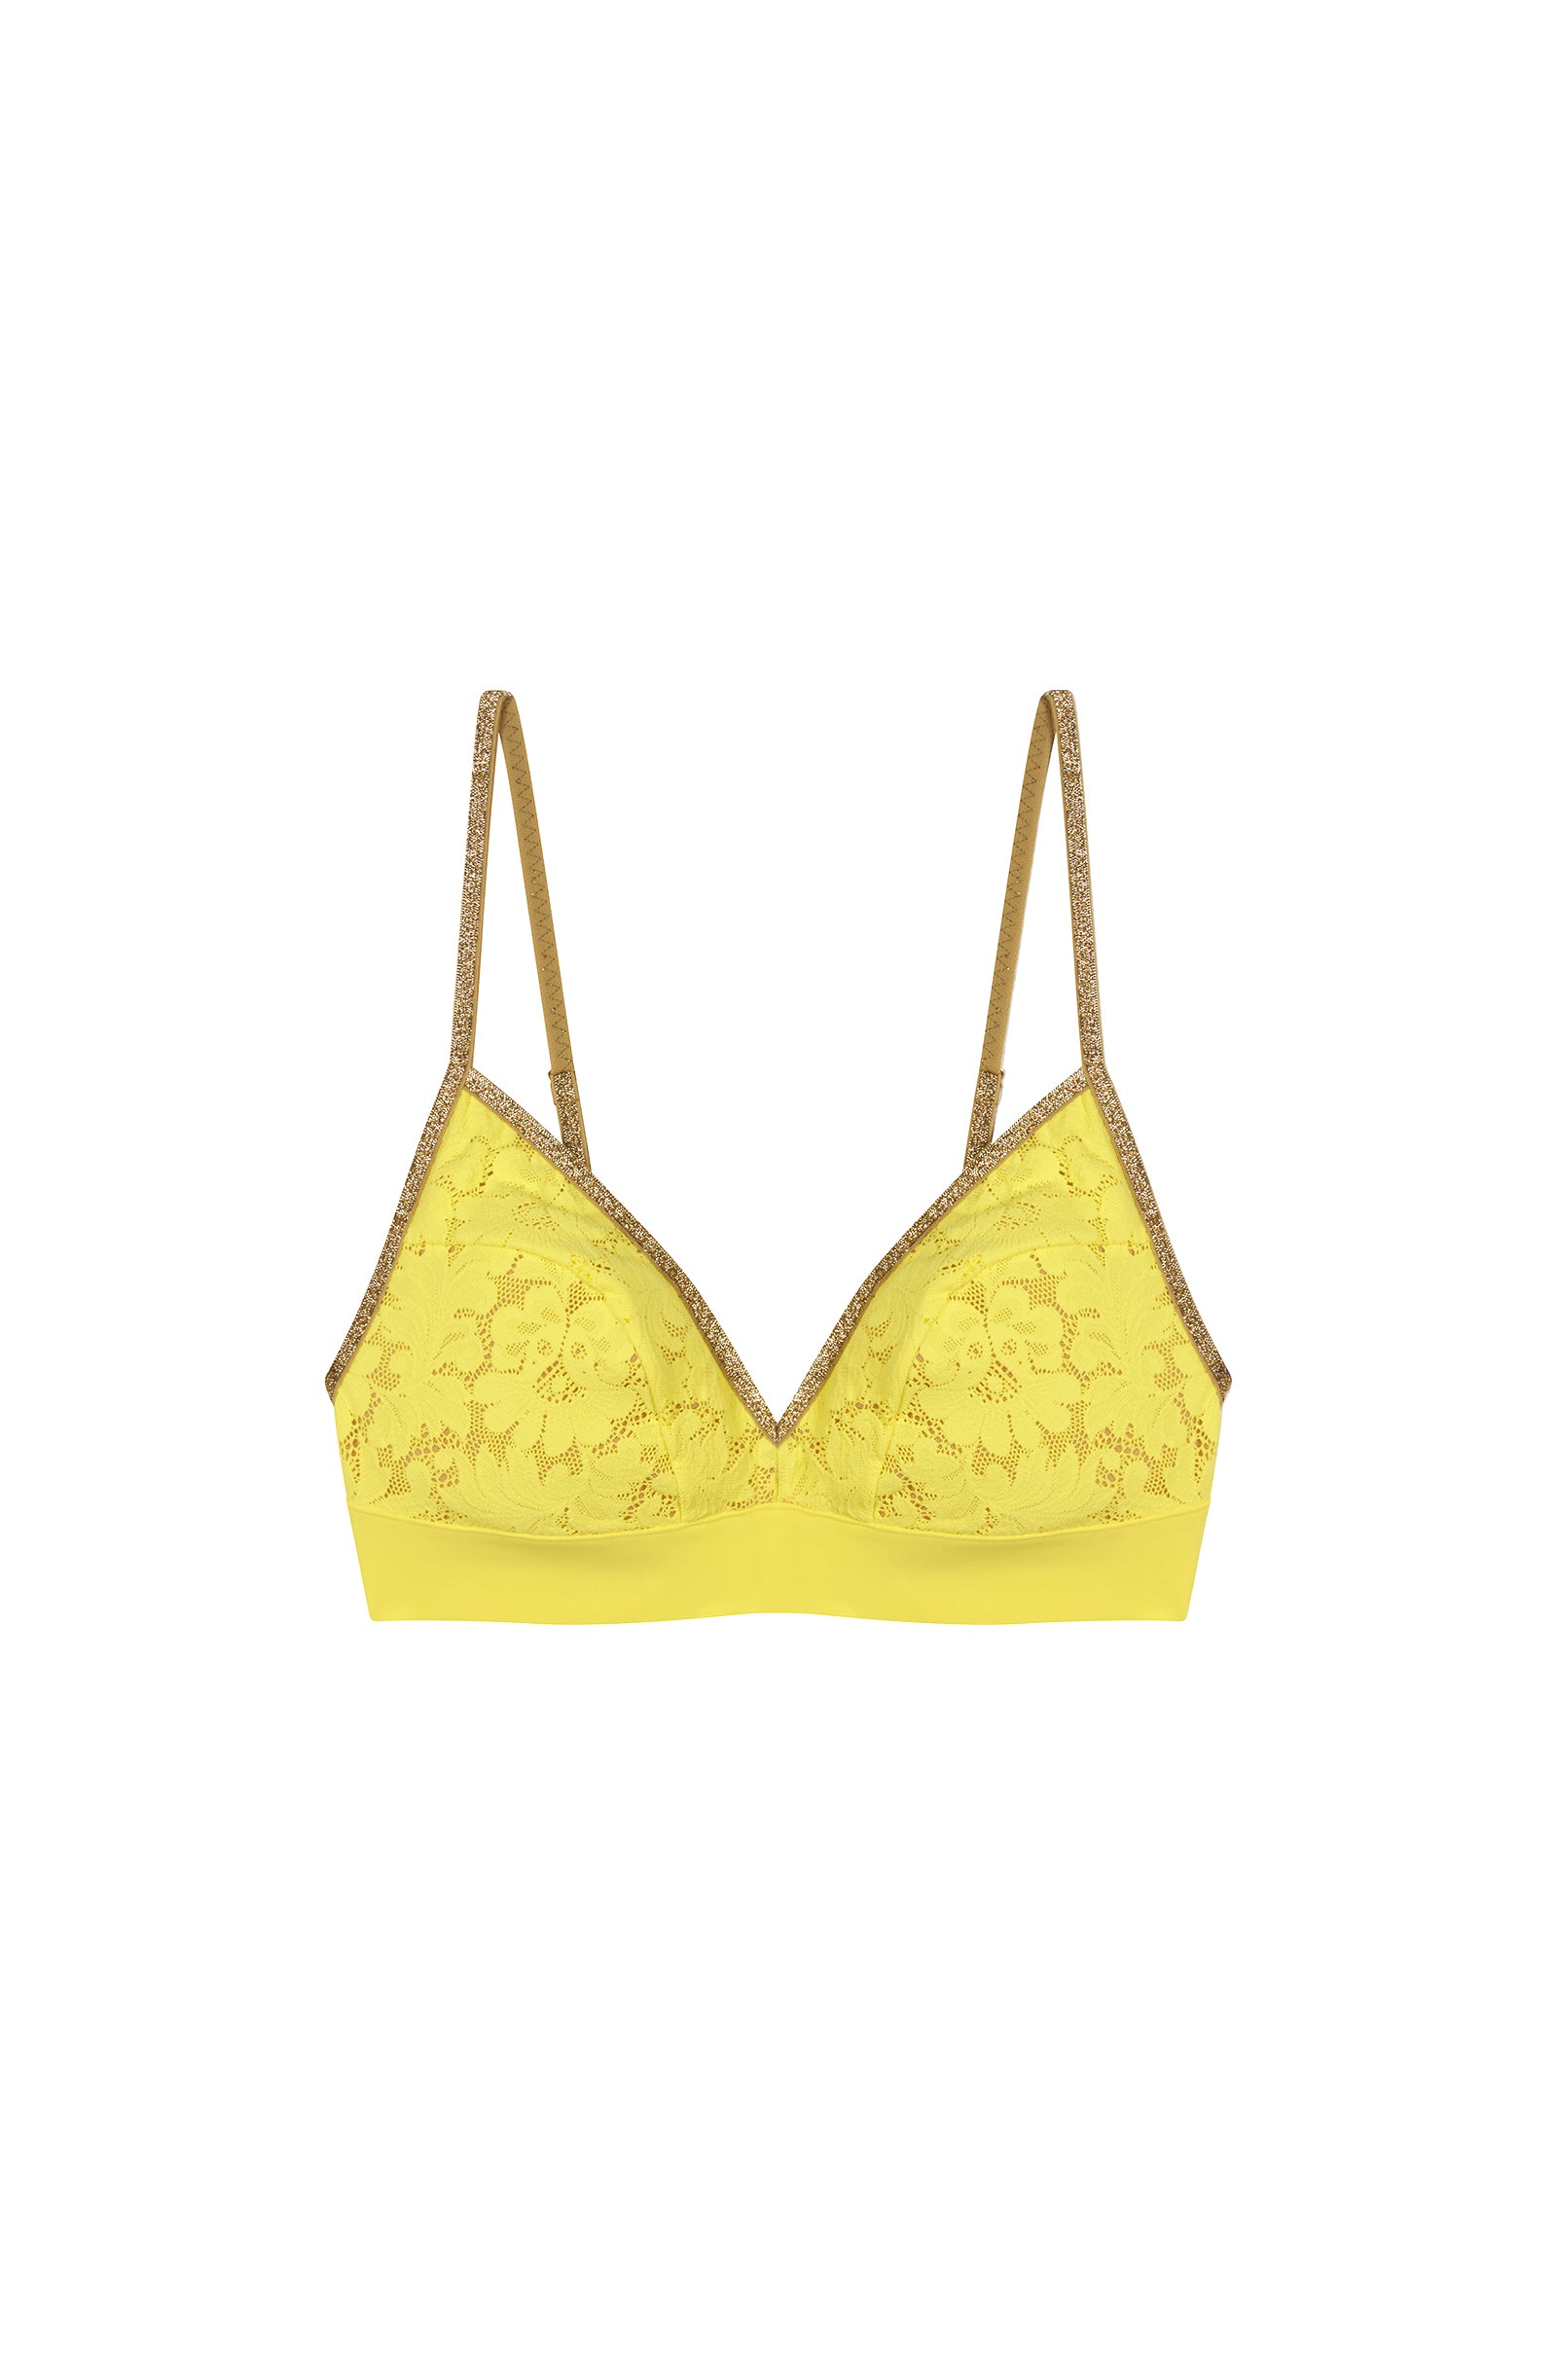 NYNI - Yellow lace and Lurex triangle bra - Pain de Sucre